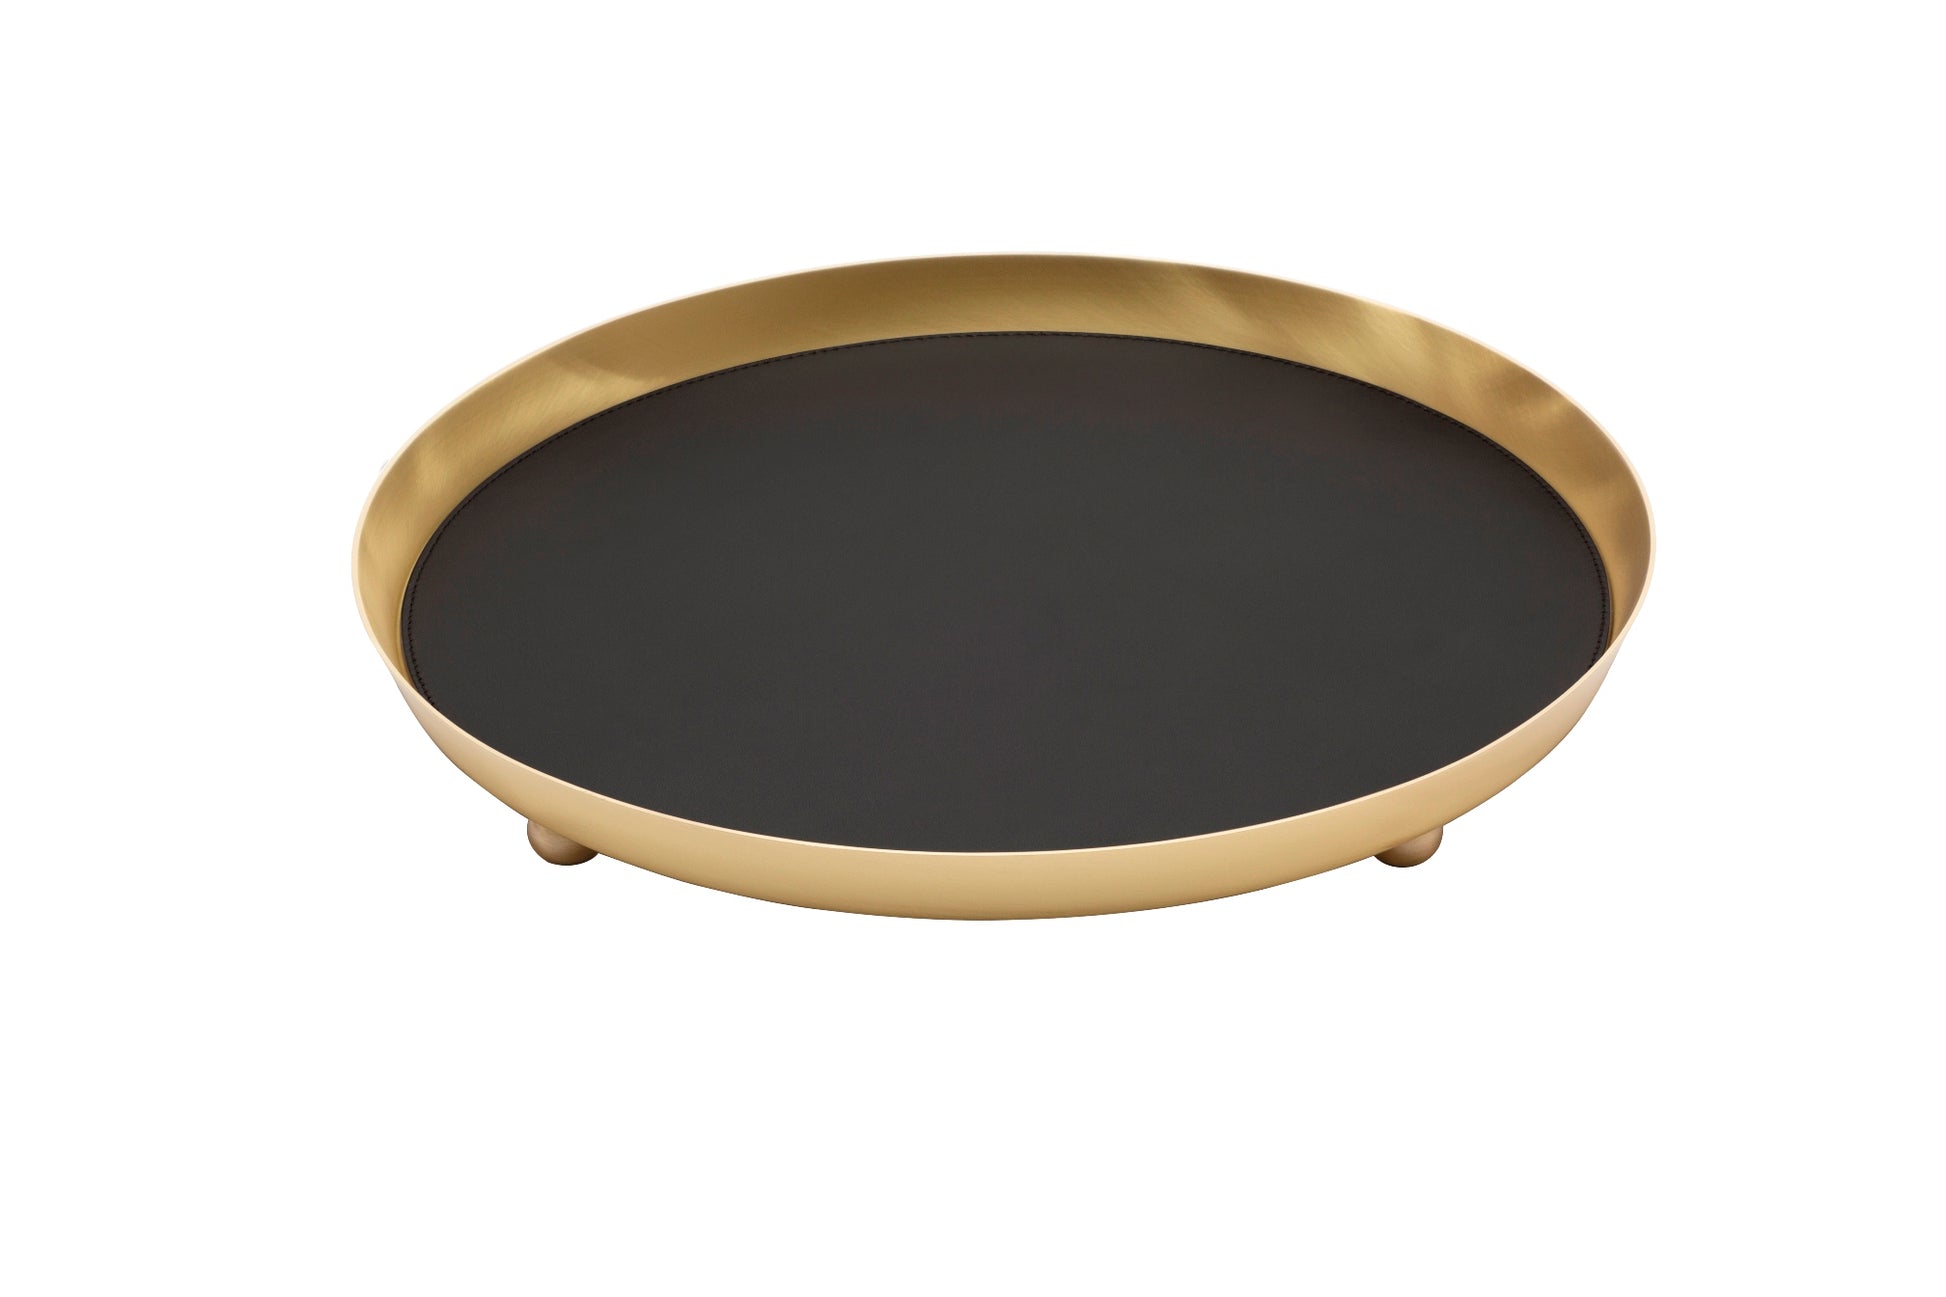 Giobagnara Monza Large Round Valet Trays | Luxury Desk Accessories, Elegant Home Organizers & Gift Items | 2Jour Concierge, #1 luxury high-end gift & lifestyle shop